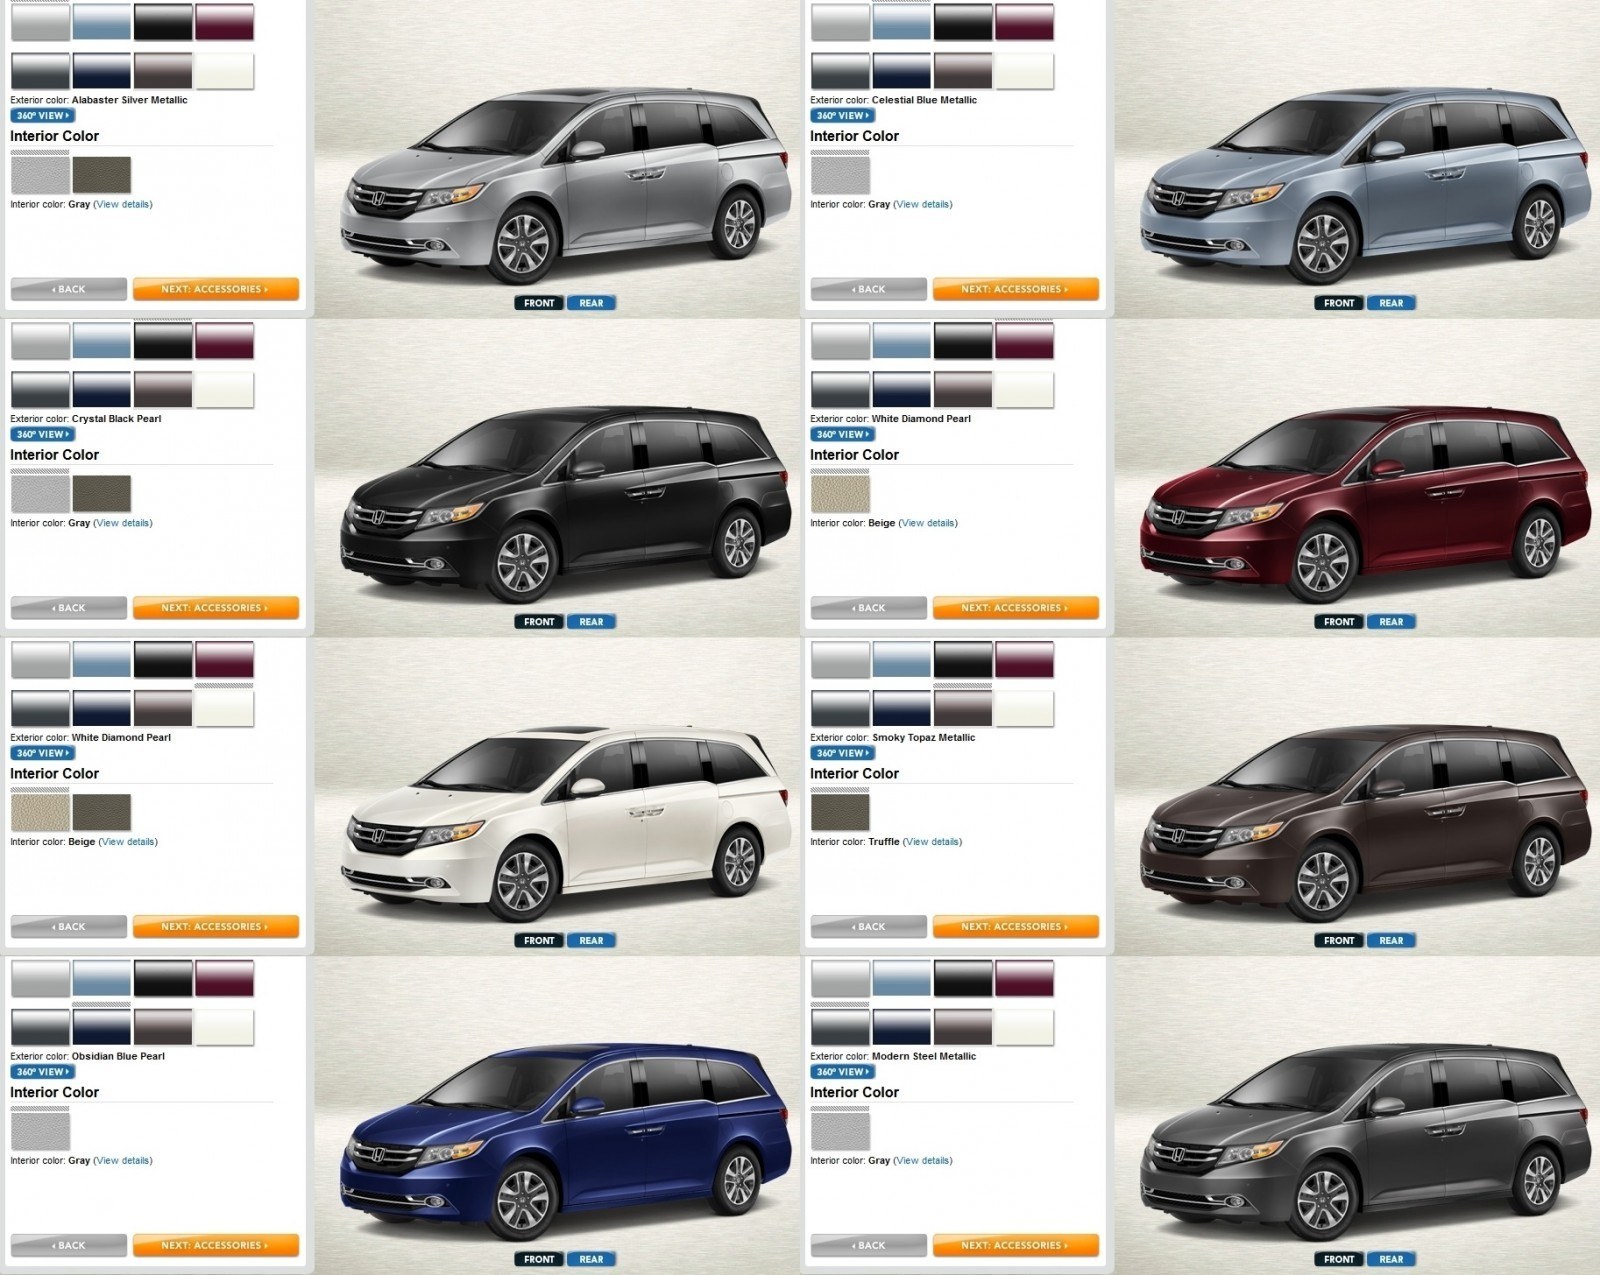 40 Popular 2014 odyssey exterior colors with Sample Images